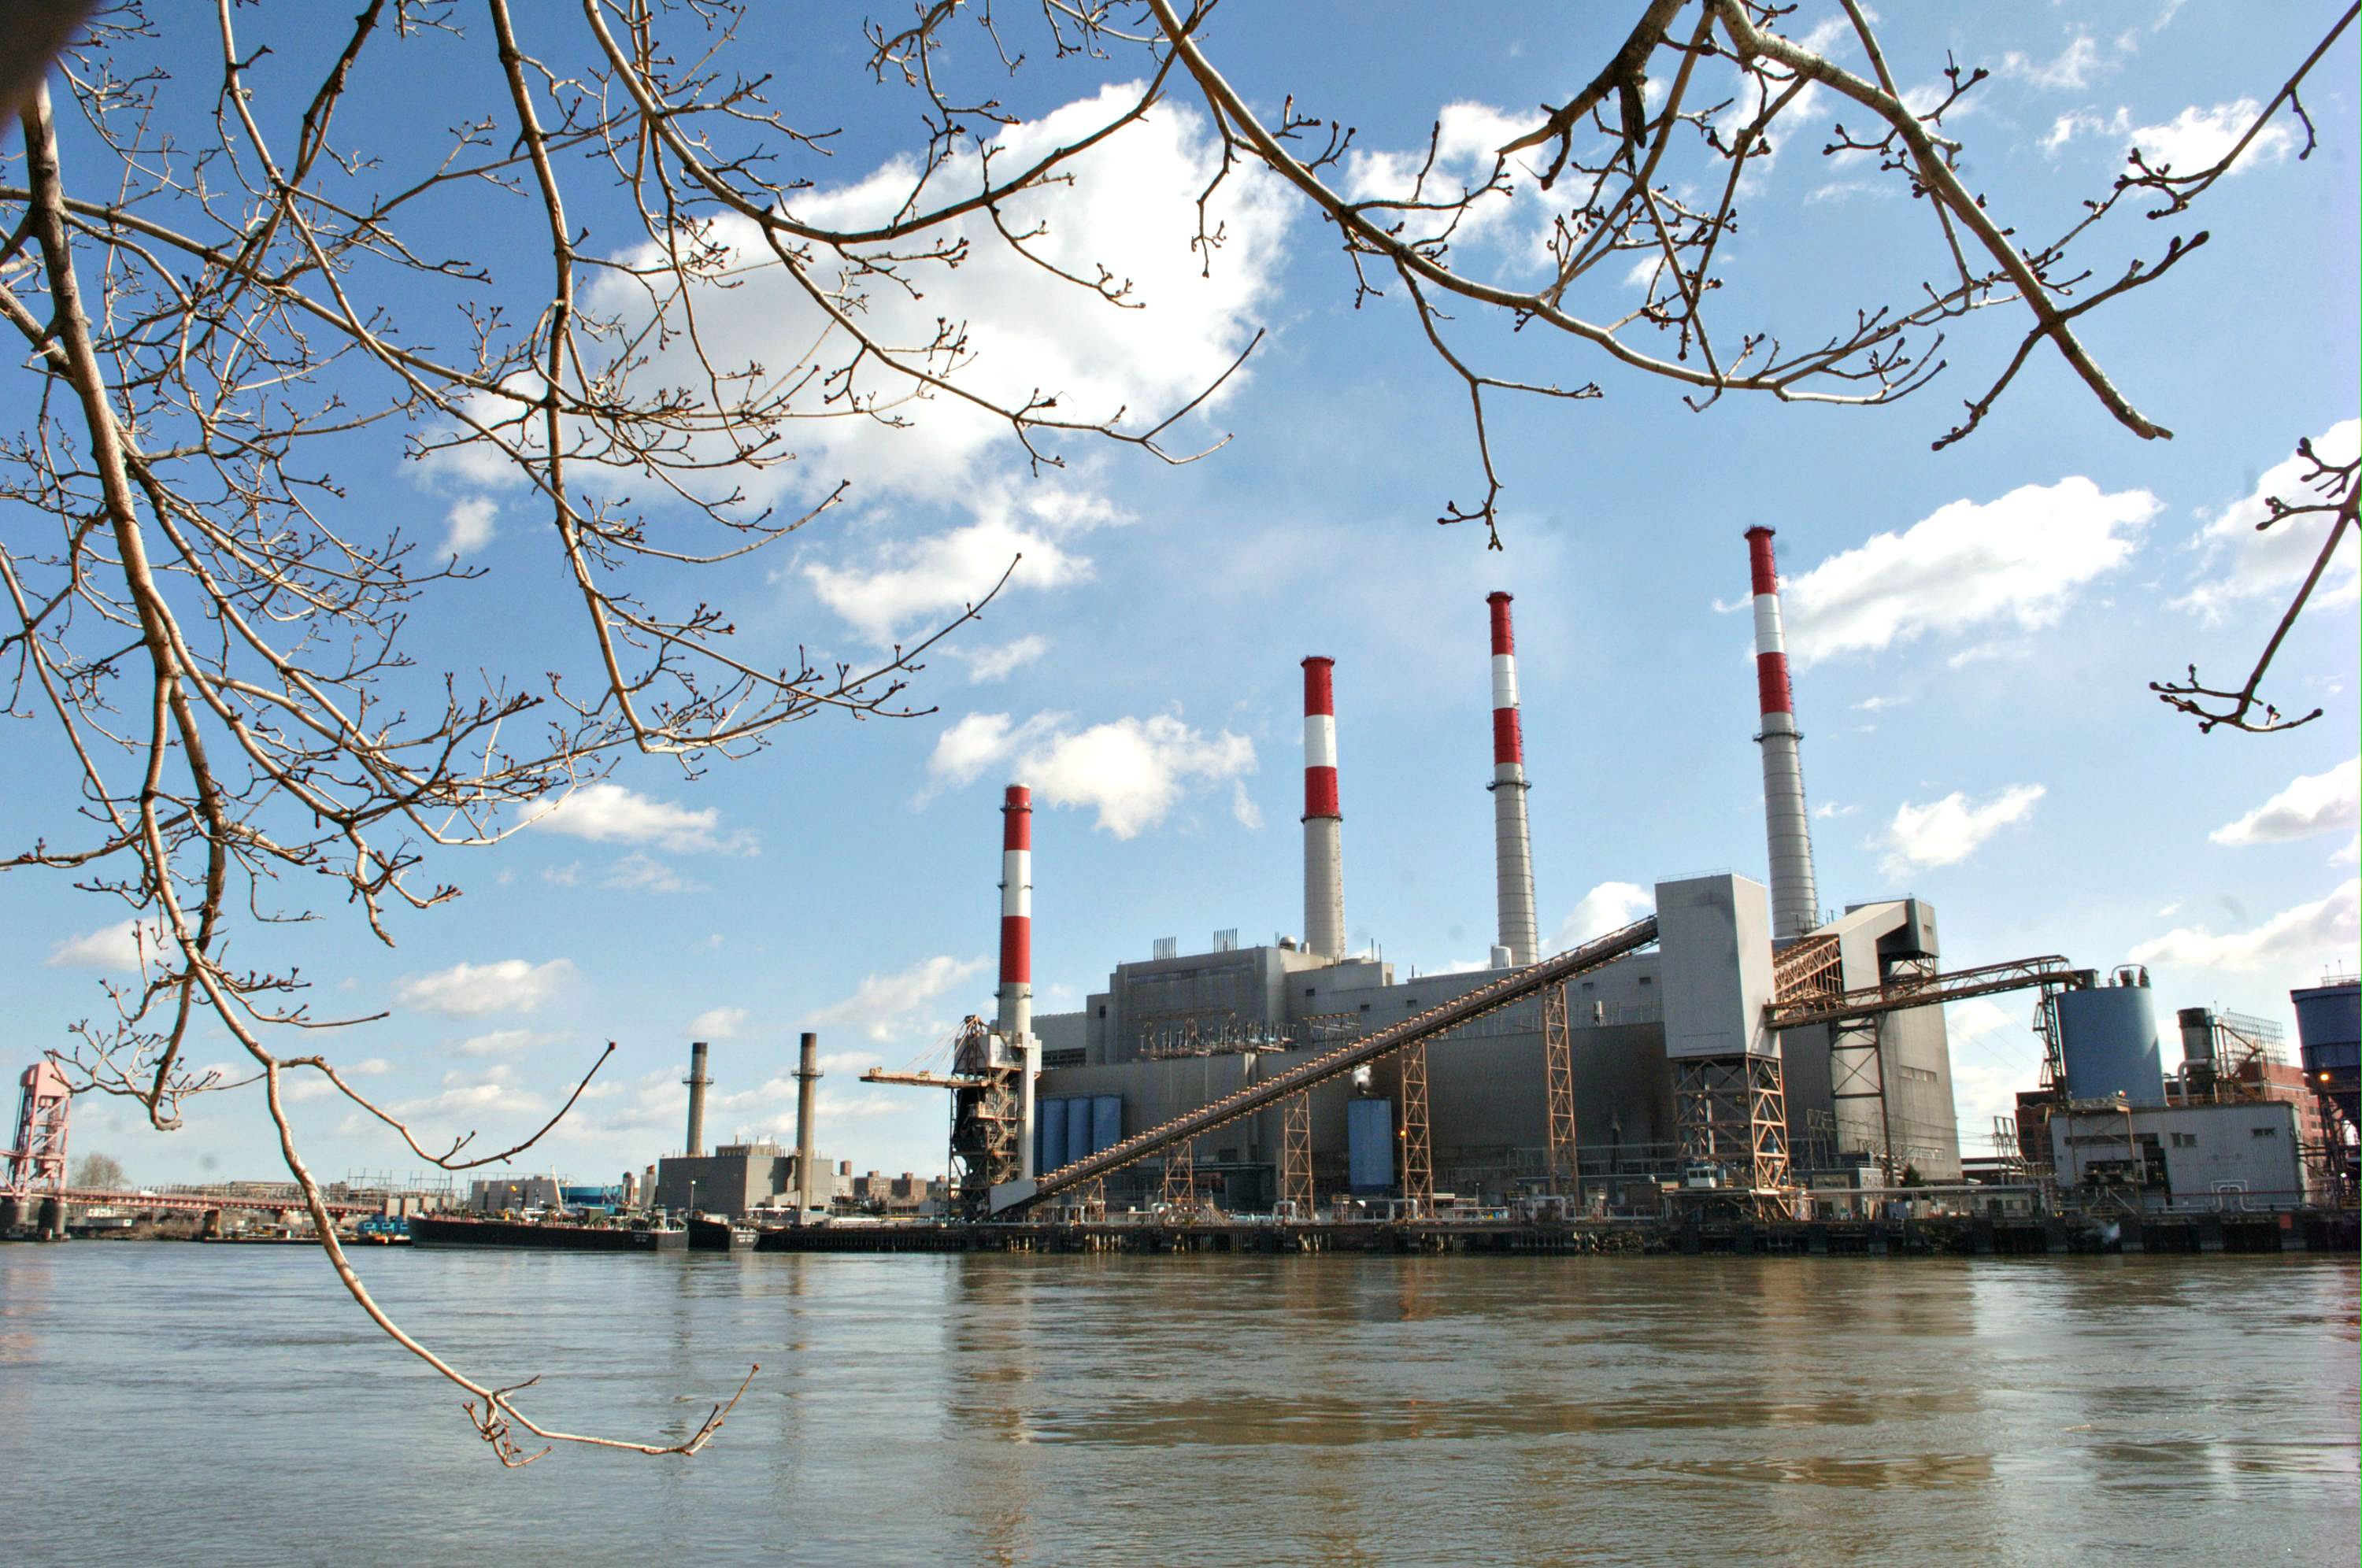 Ravenswood Power Plant in Long Island City, New York.